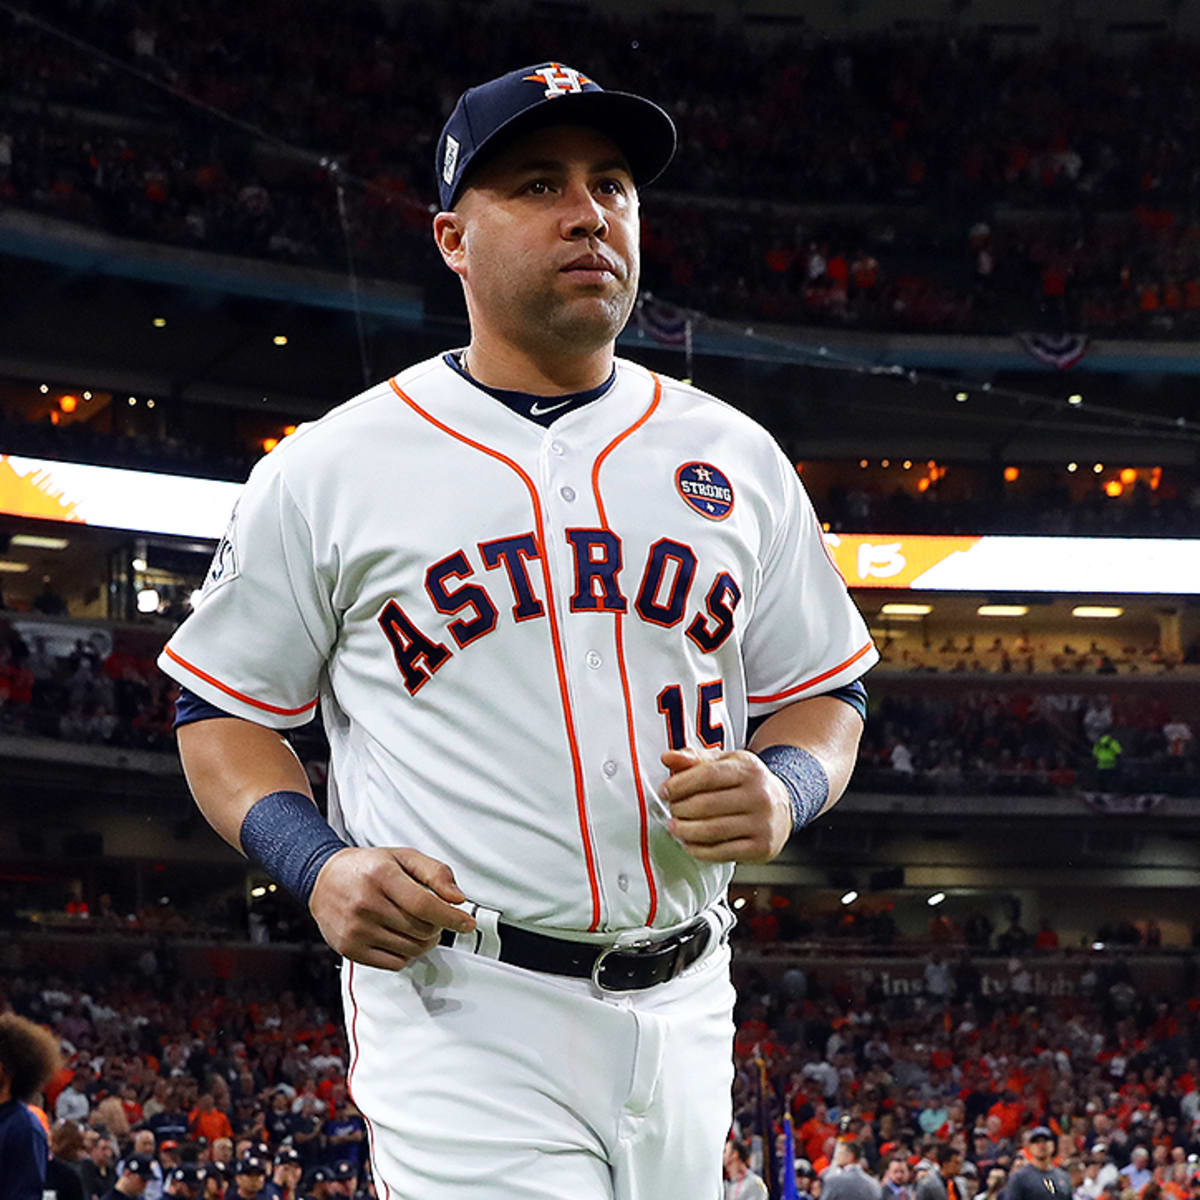 Houston Astros: Road to the Playoffs and World Series Glory